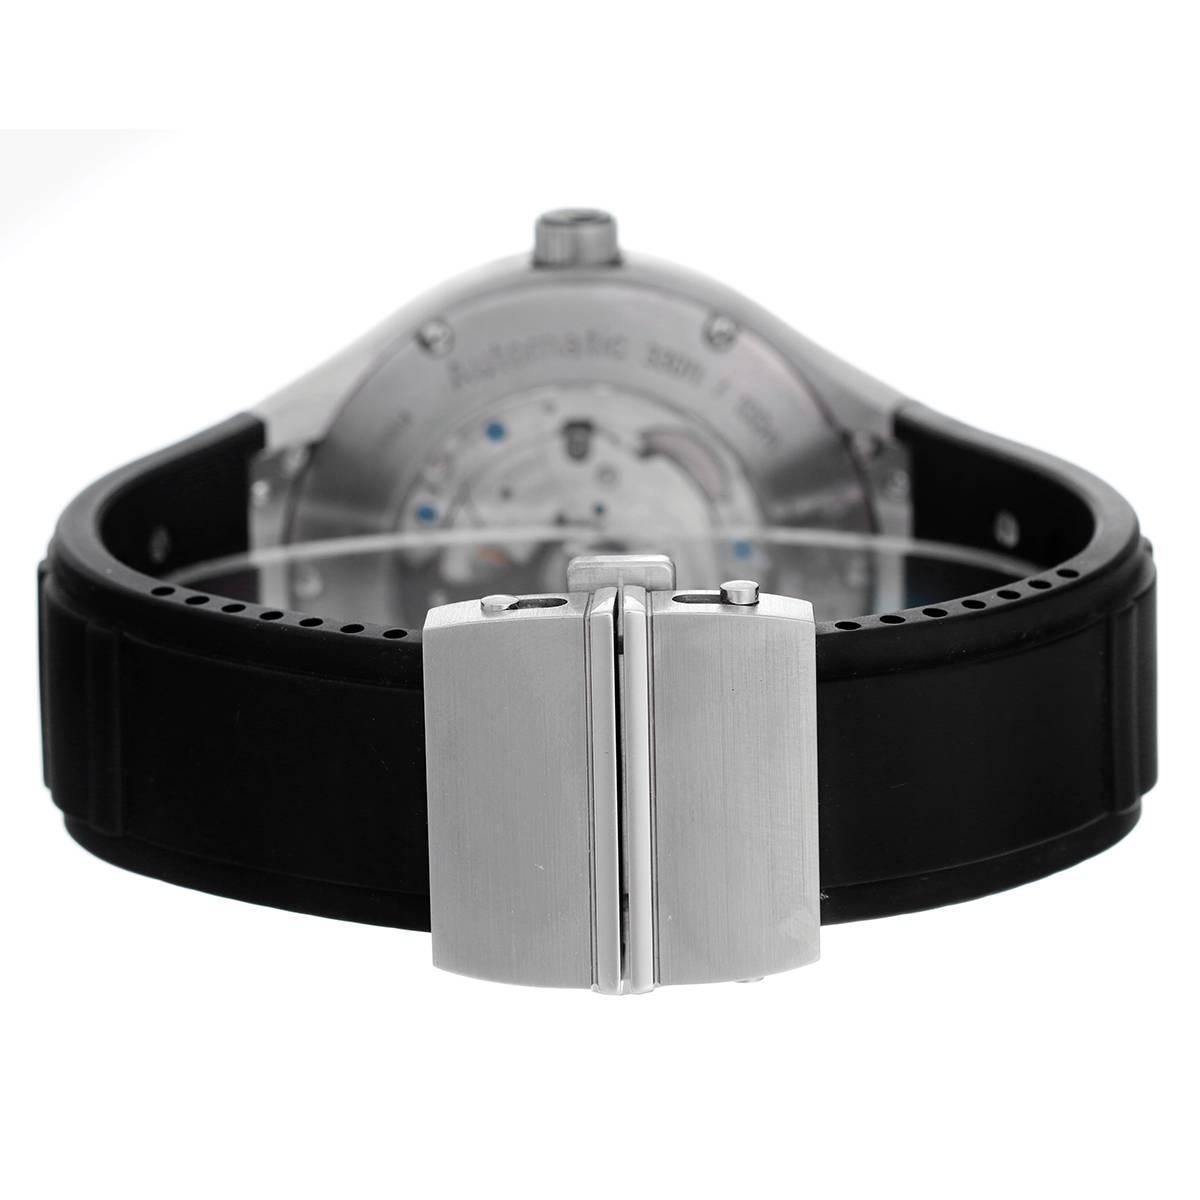 Quartz. Stainless steel and Titanium case (45mm diameter) . Exposition case back. Black dial with date at 6 o'clock. Rubber strap with Piaget deployant clasp. Pre-owned with Piaget box. Retail Price: $12,900.00